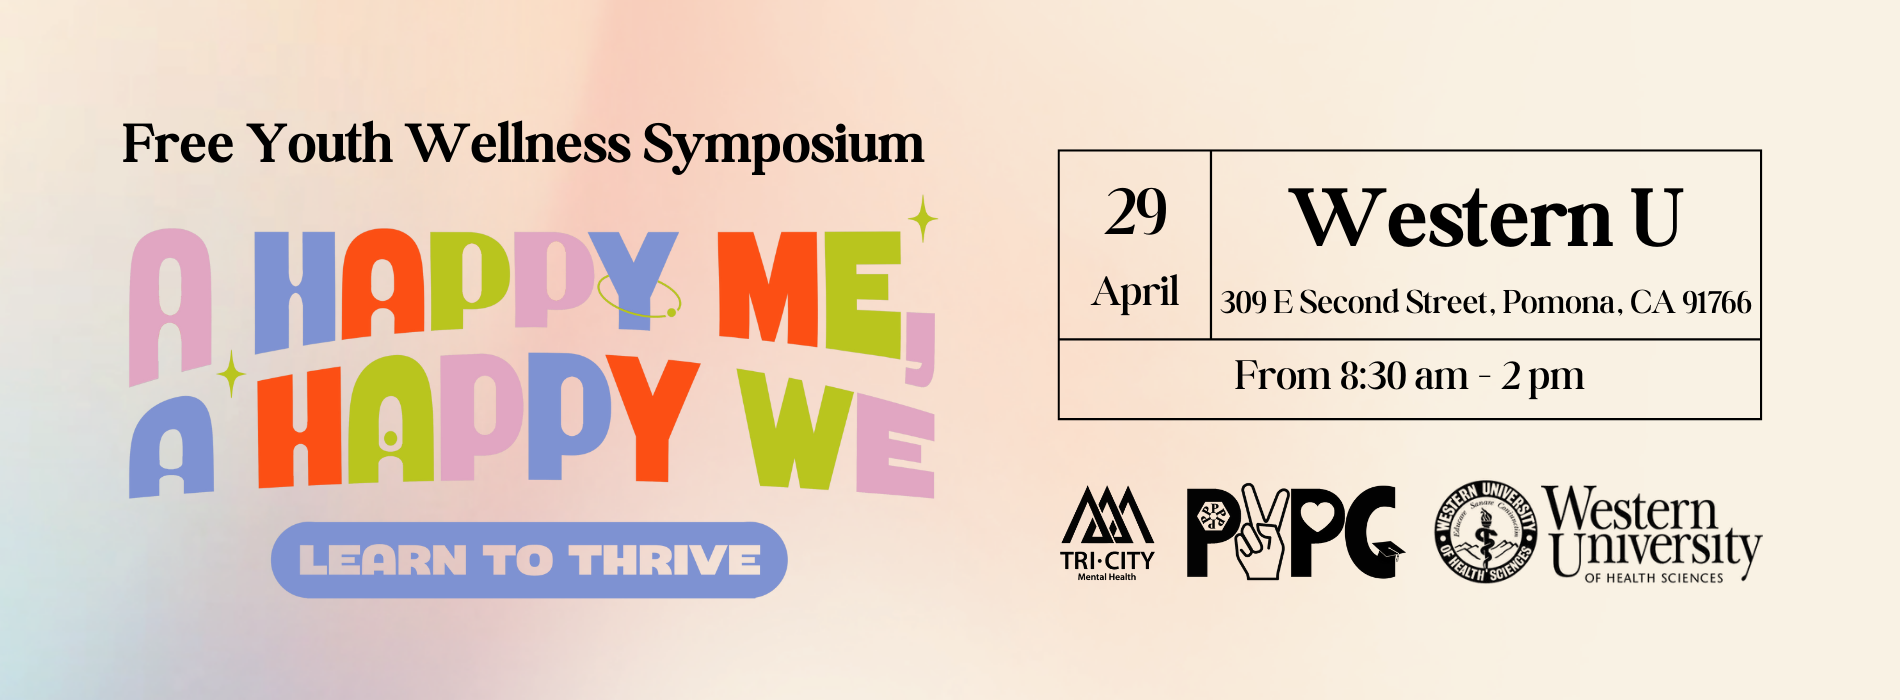 A Happy Me, A Happy We: Learn to Thrive Youth Wellness Symposium to be held on April 29, 2023 at Western University from 8:30 am to 2:00 pm. 